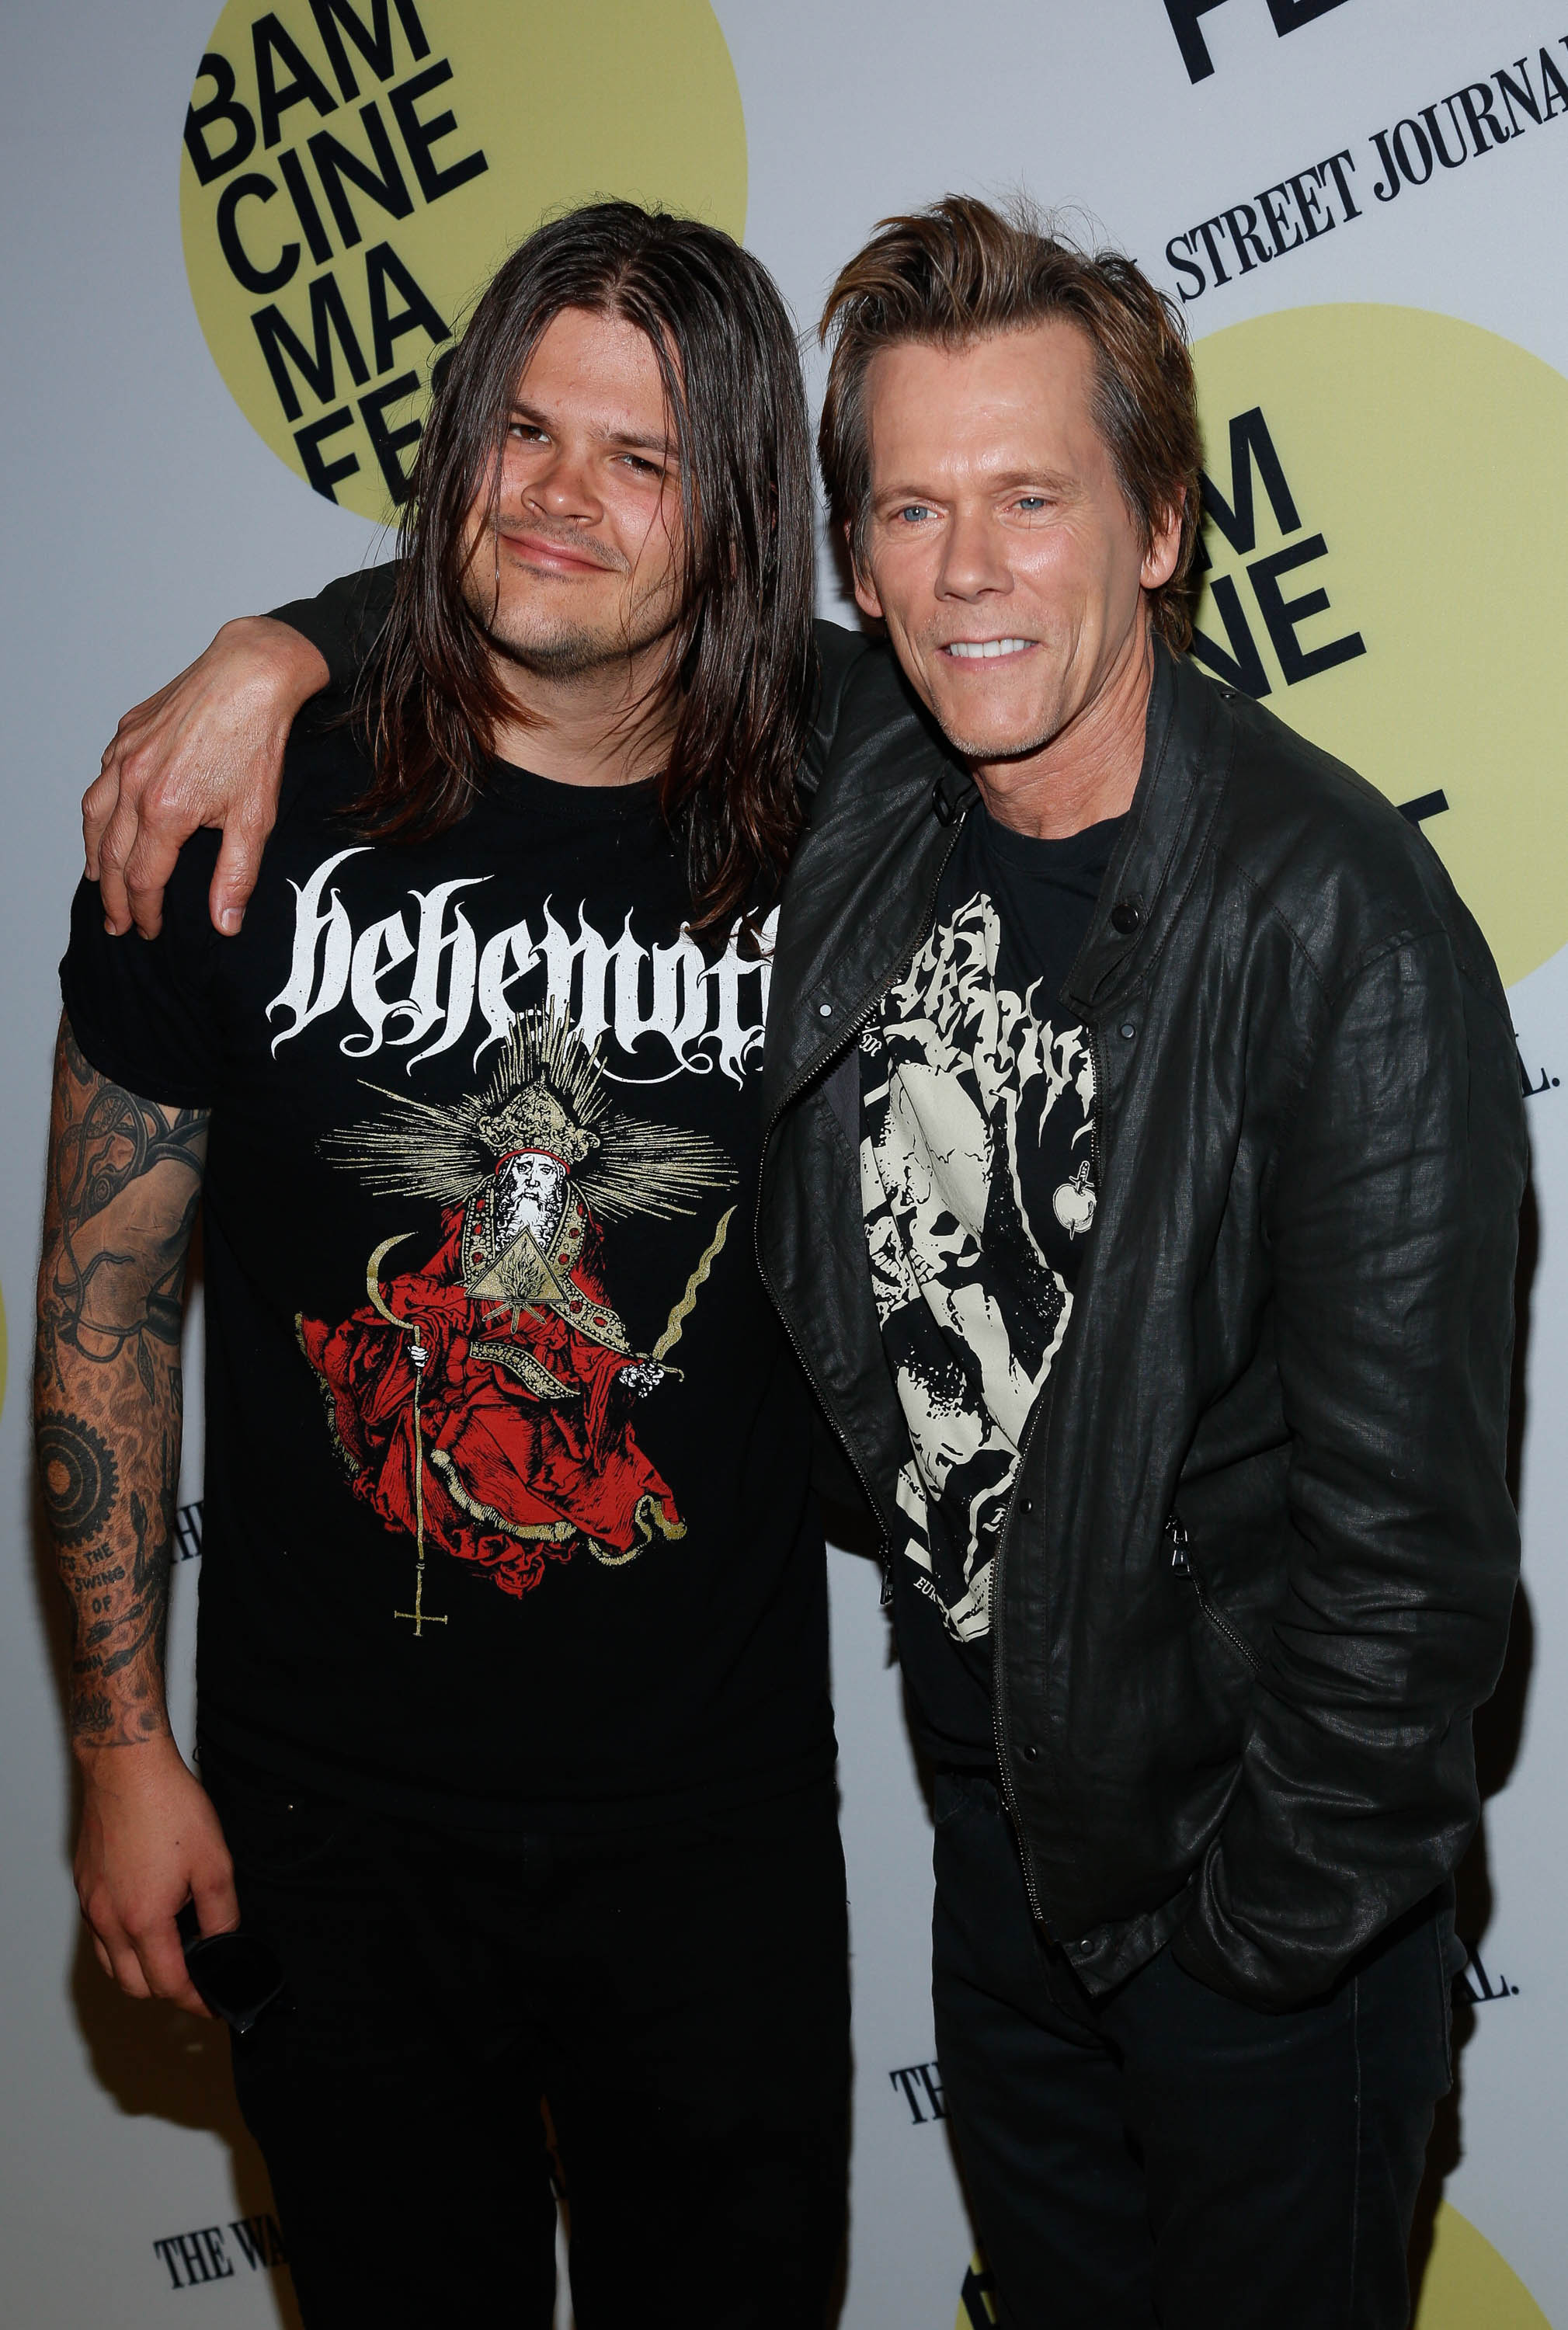 Kevin Bacon and Travis Bacon at the premiere of "Cop Car" on June 21, 2015 | Source: Getty Images